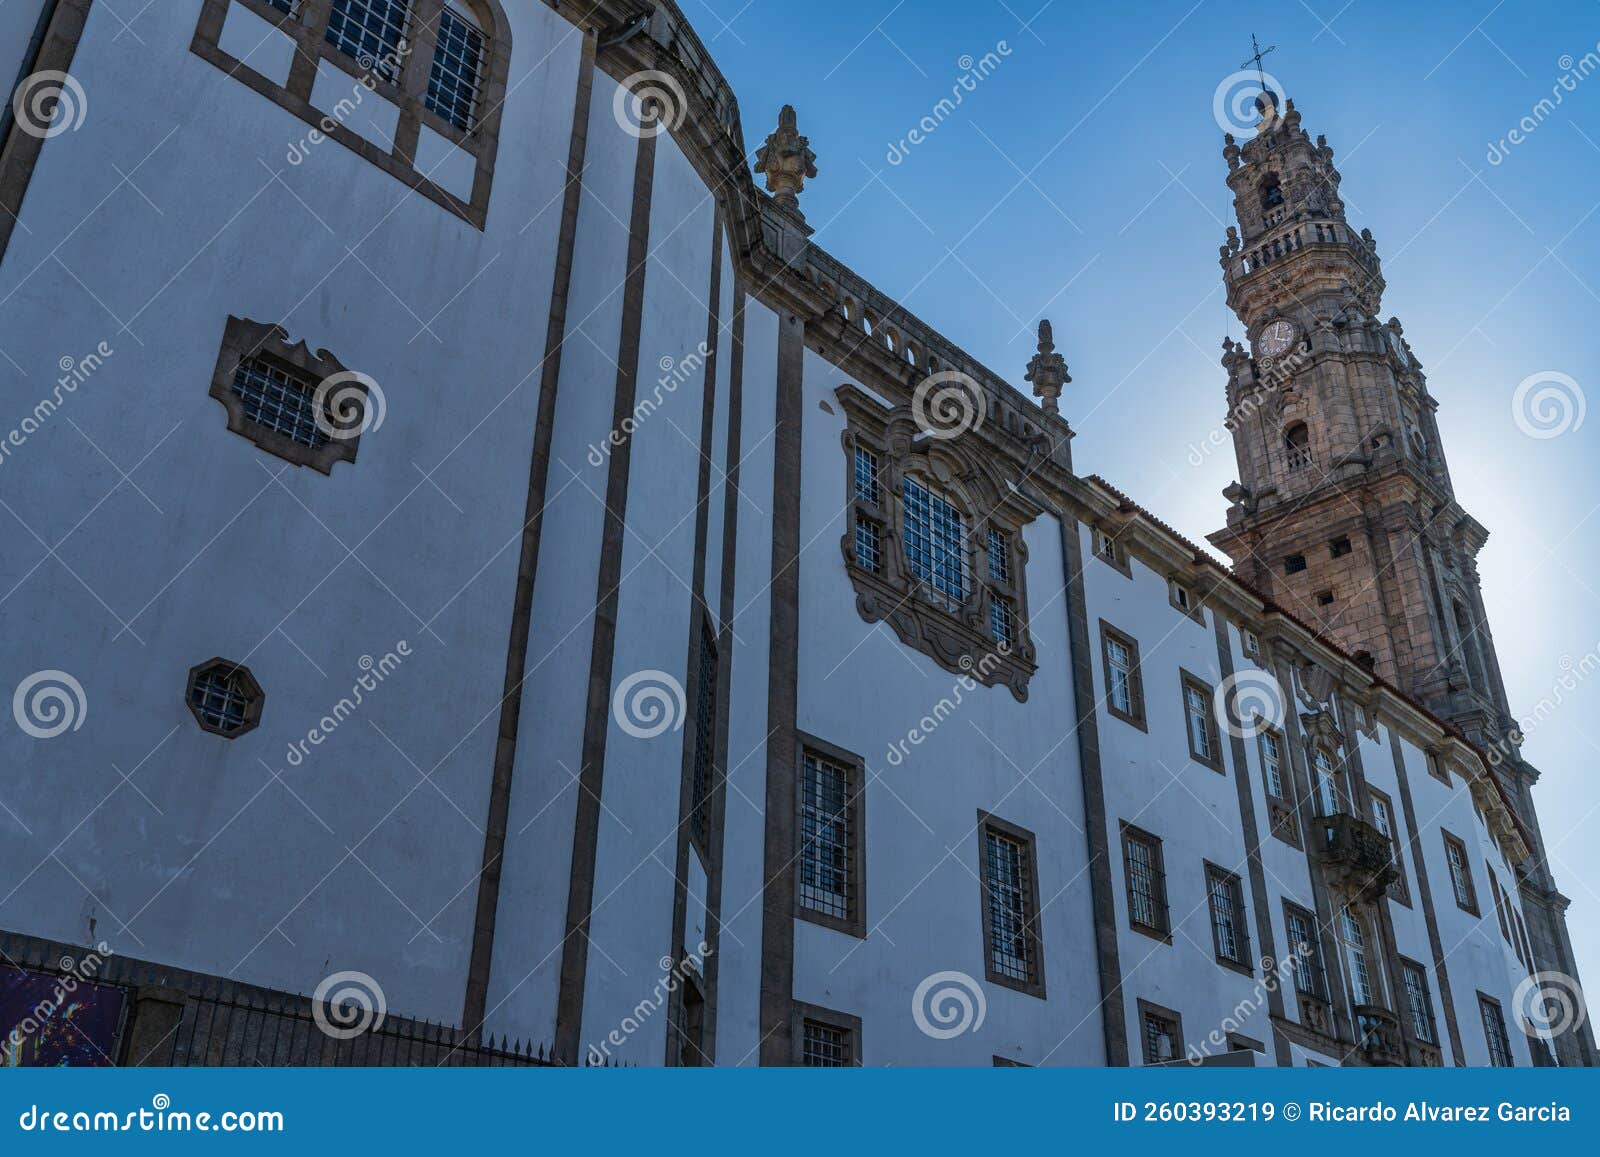 clerigos tower in the city of porto in portugal